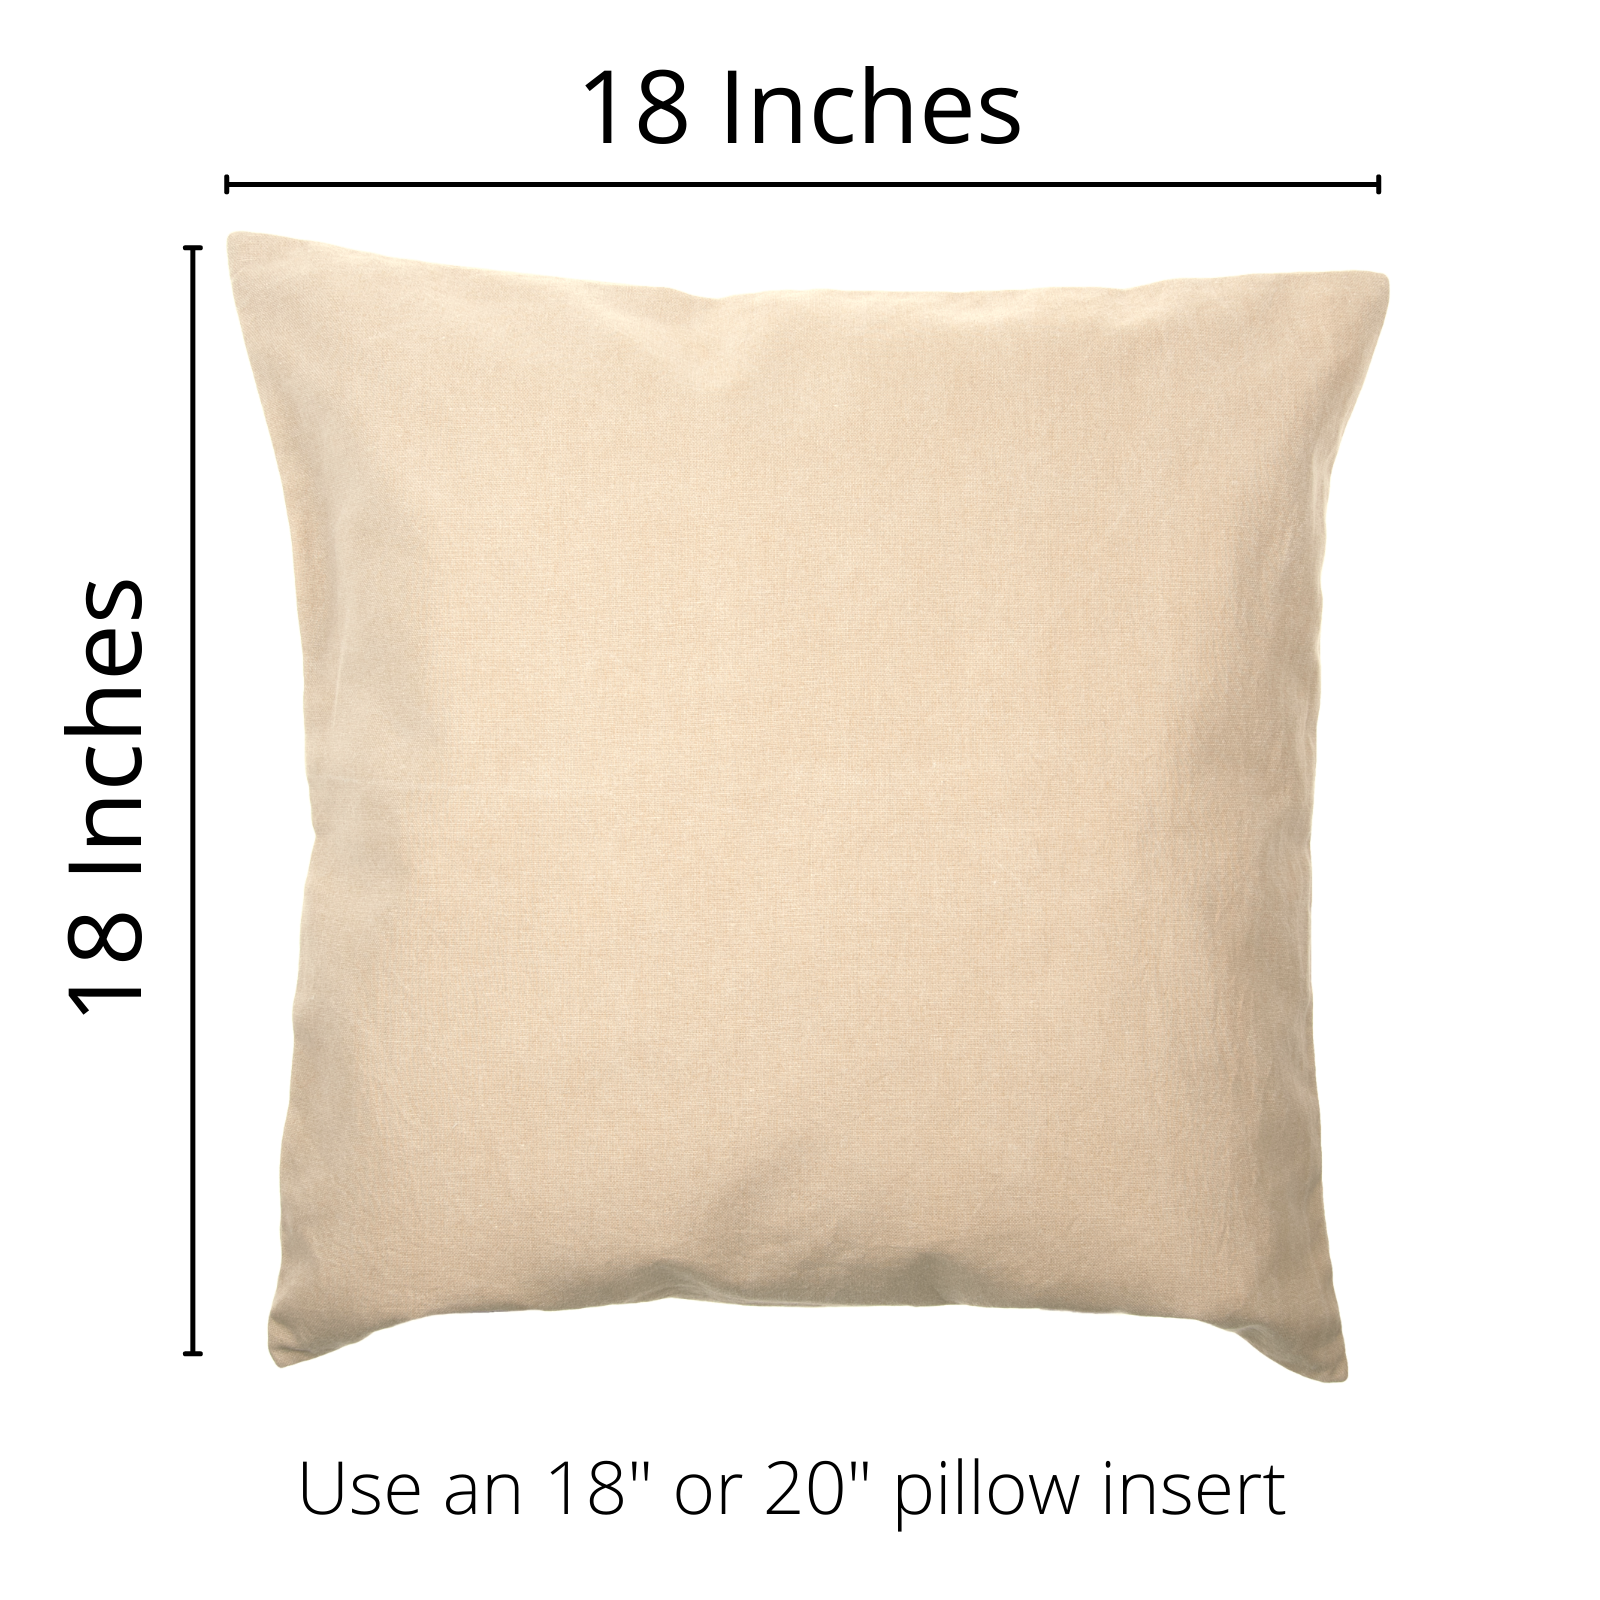 Colonial Star 1776 Pillow Cover